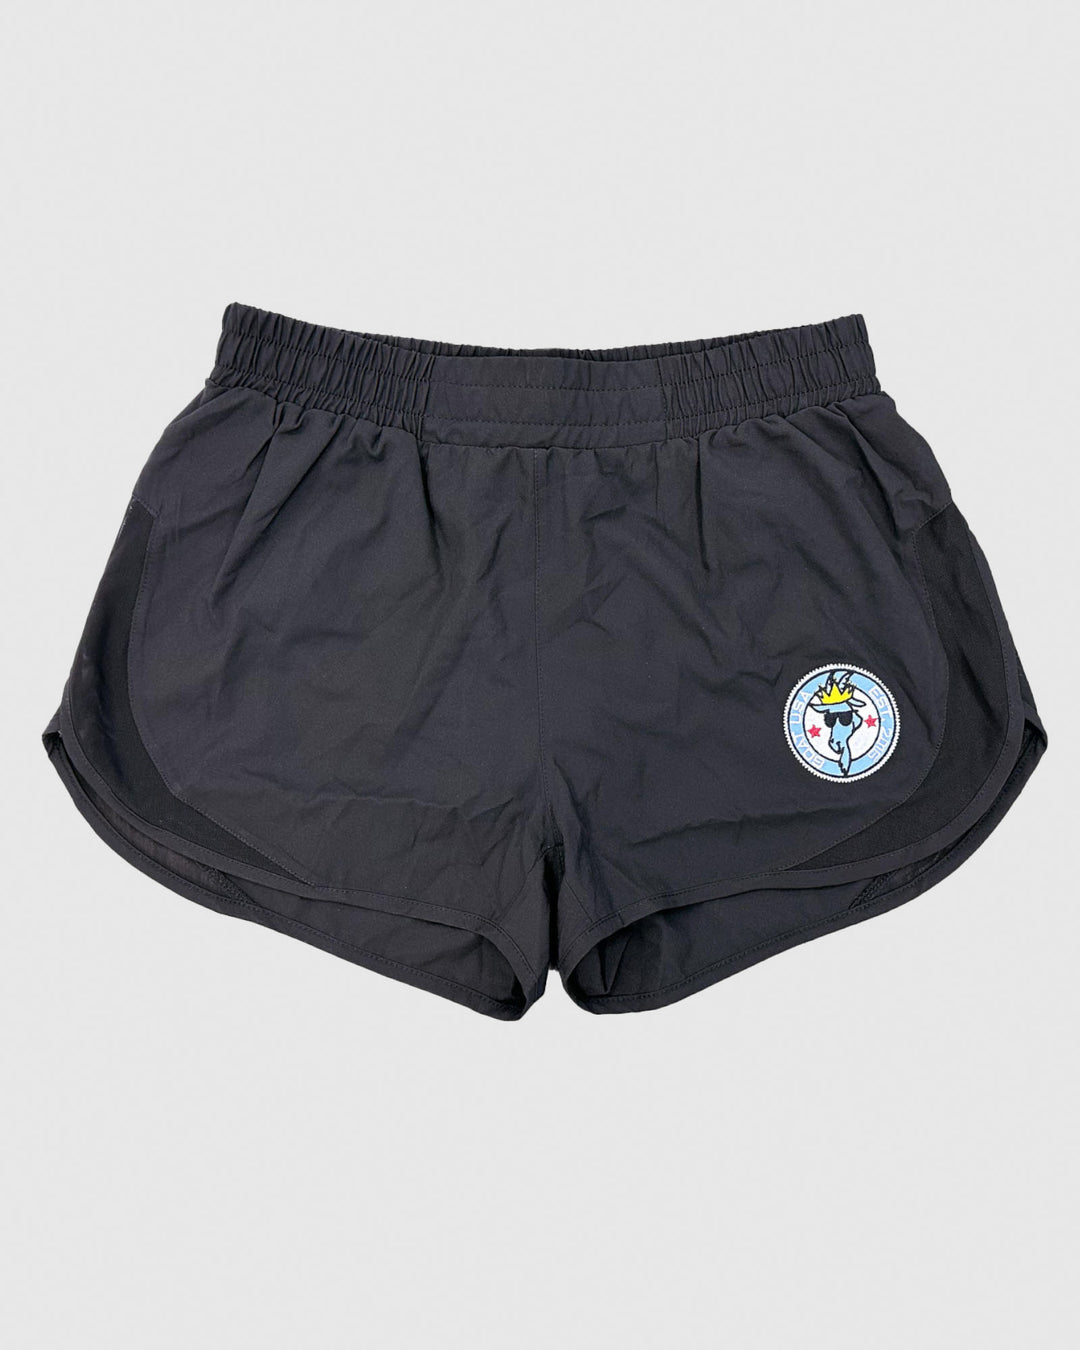 Black women's athletic shorts with goat patch